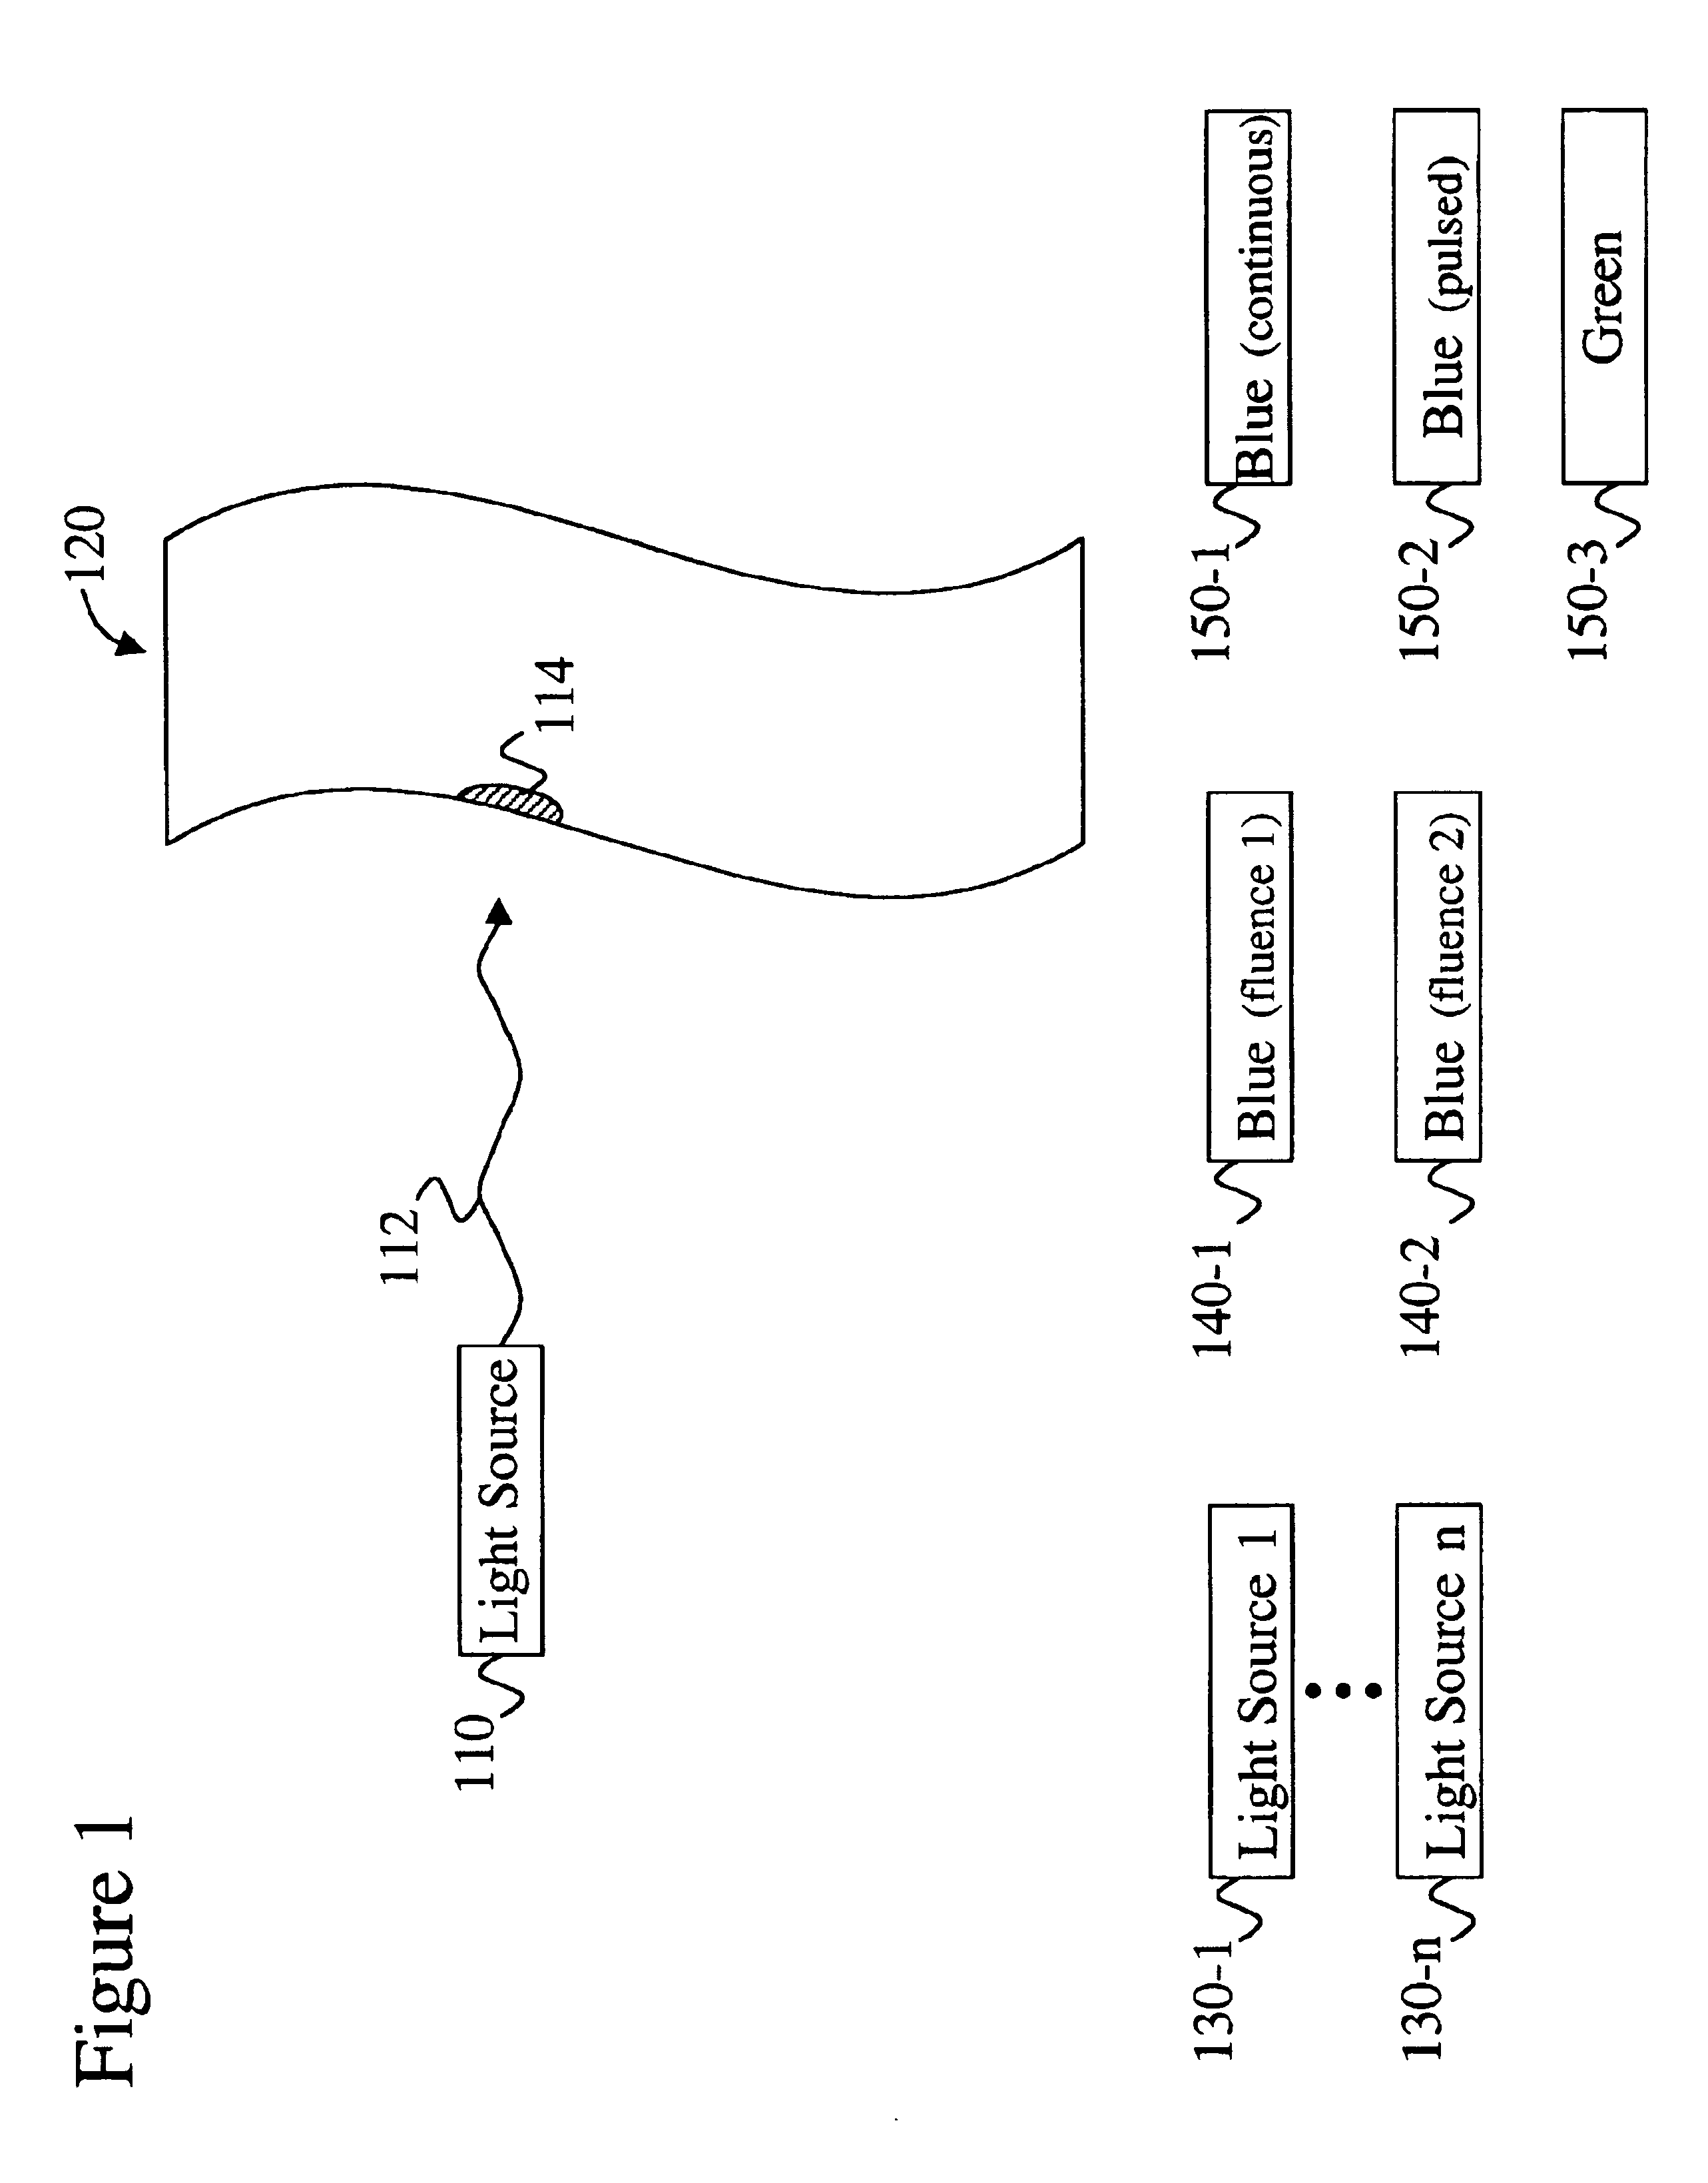 Floss for light treatment of oral structures